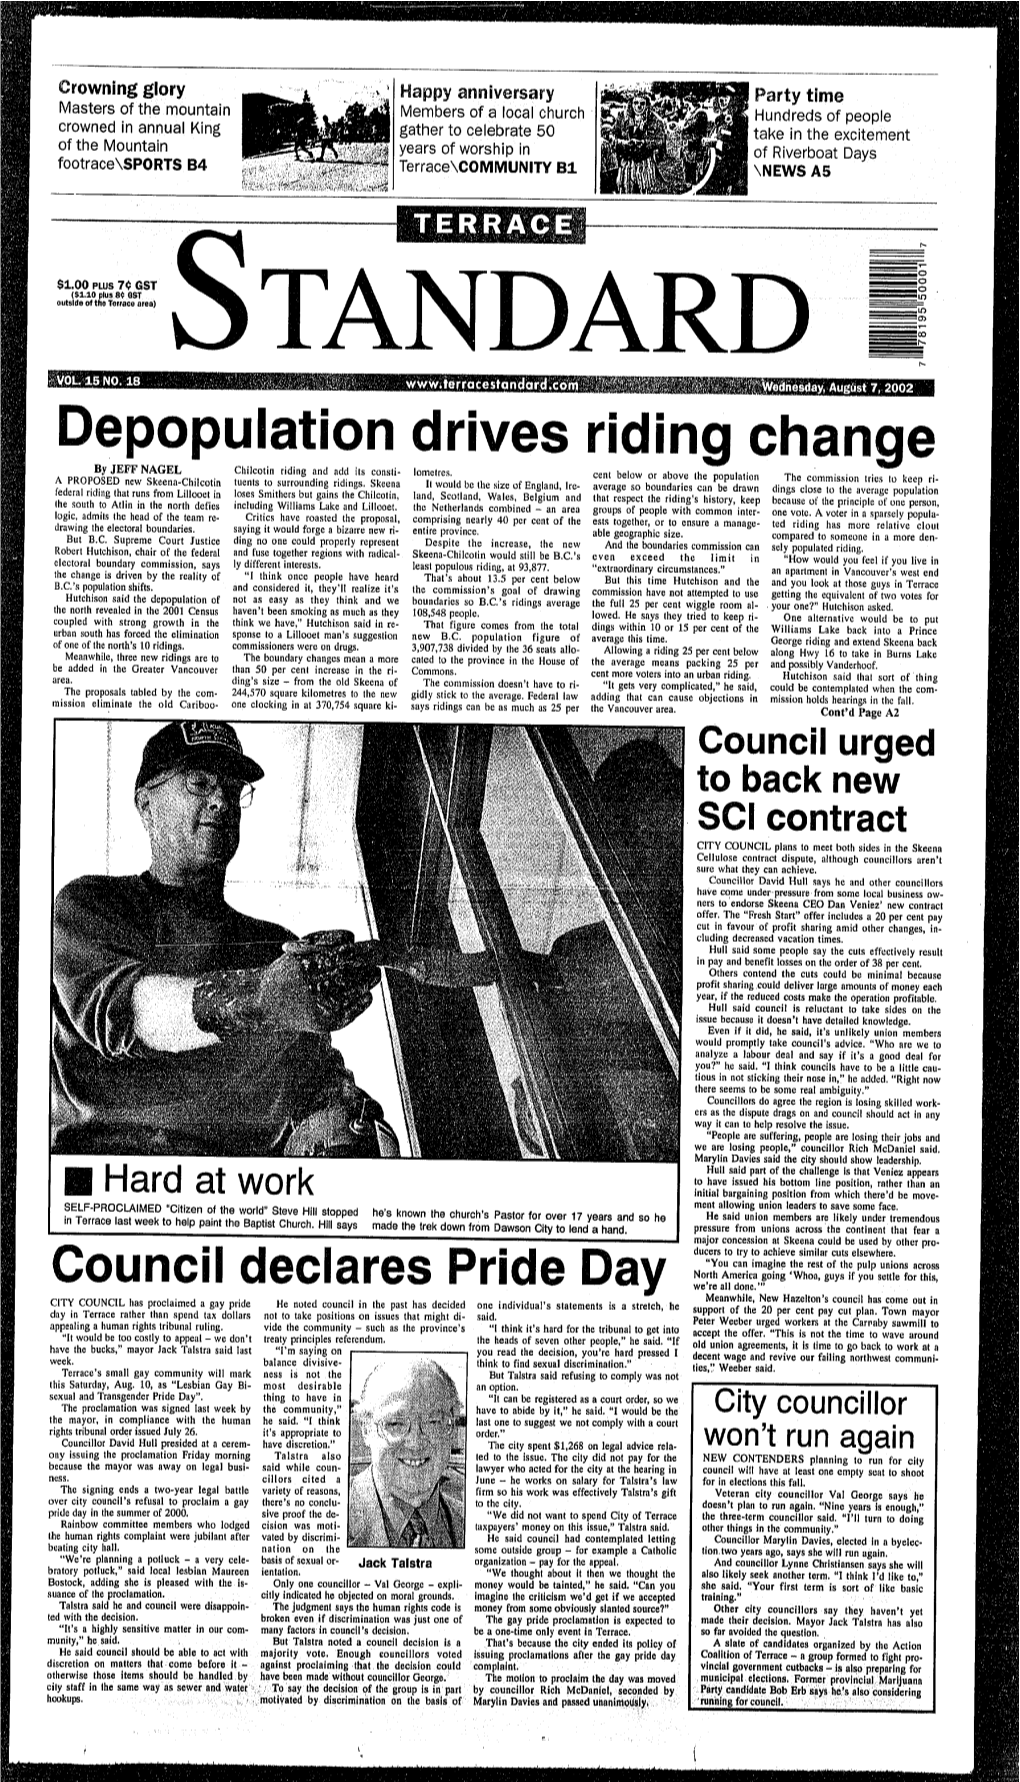 Depopulation Drives Riding Change by JEFF NAGEL Chilcotin Riding and Add Its Consti- Lometres